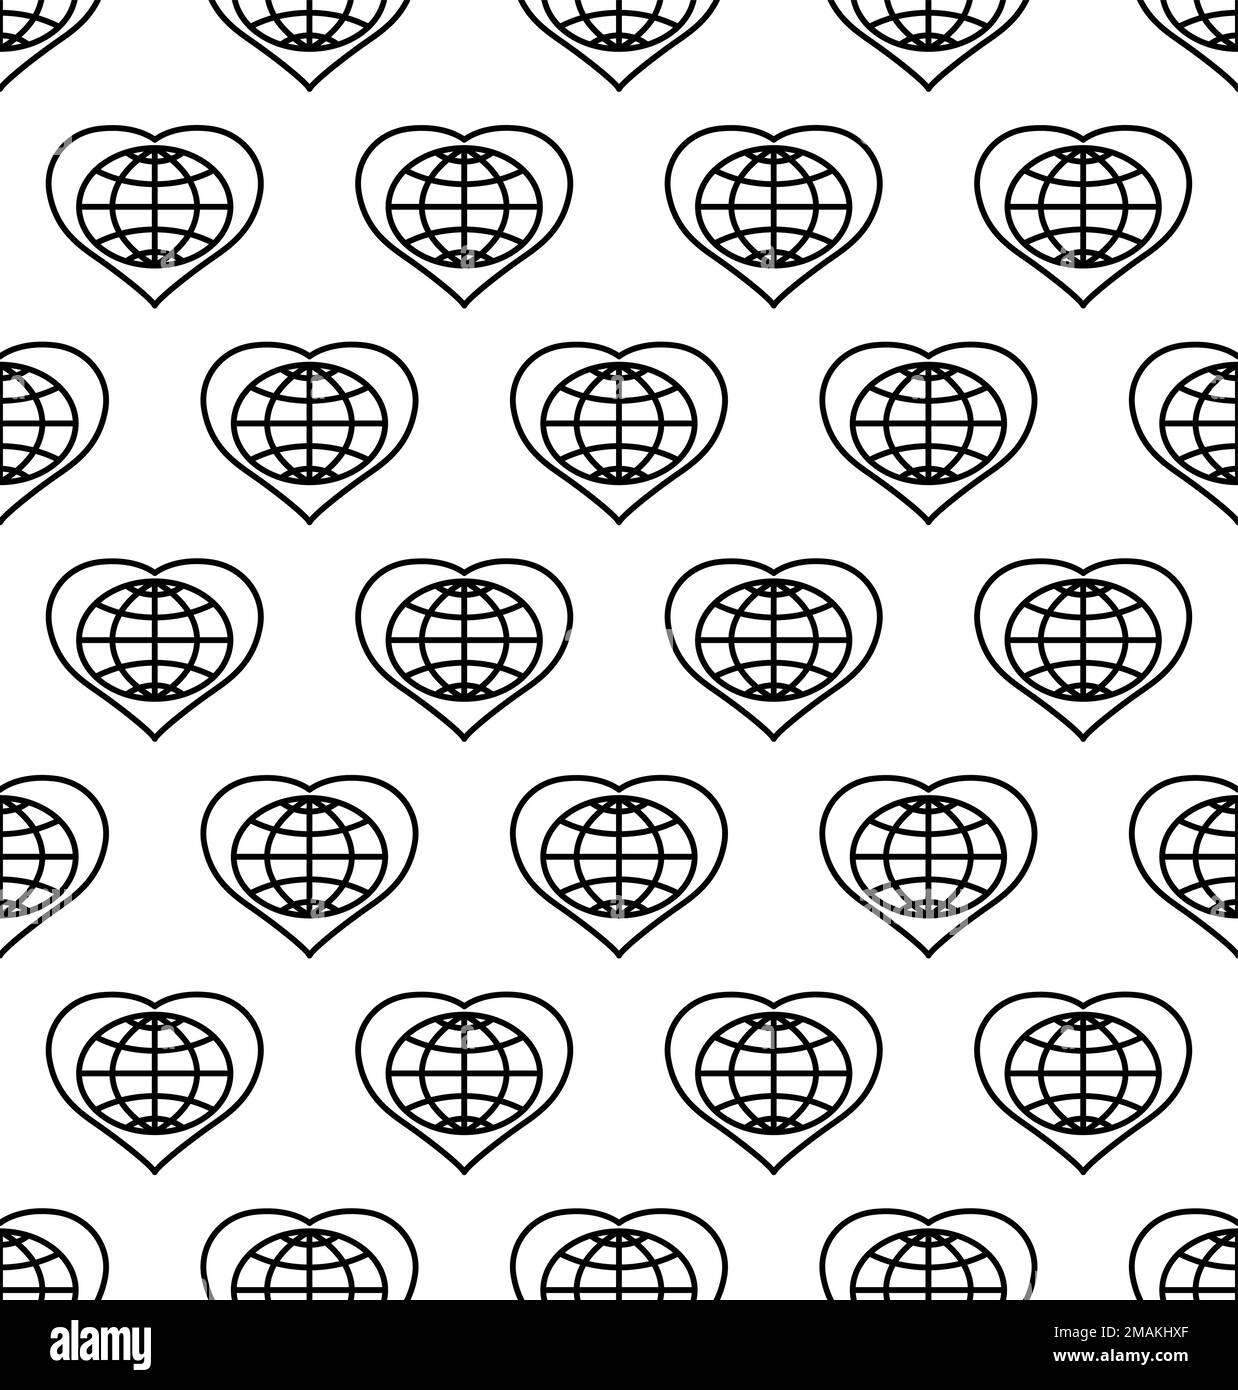 Seamless pattern of an abstract contour globe and heart symbol Stock Vector